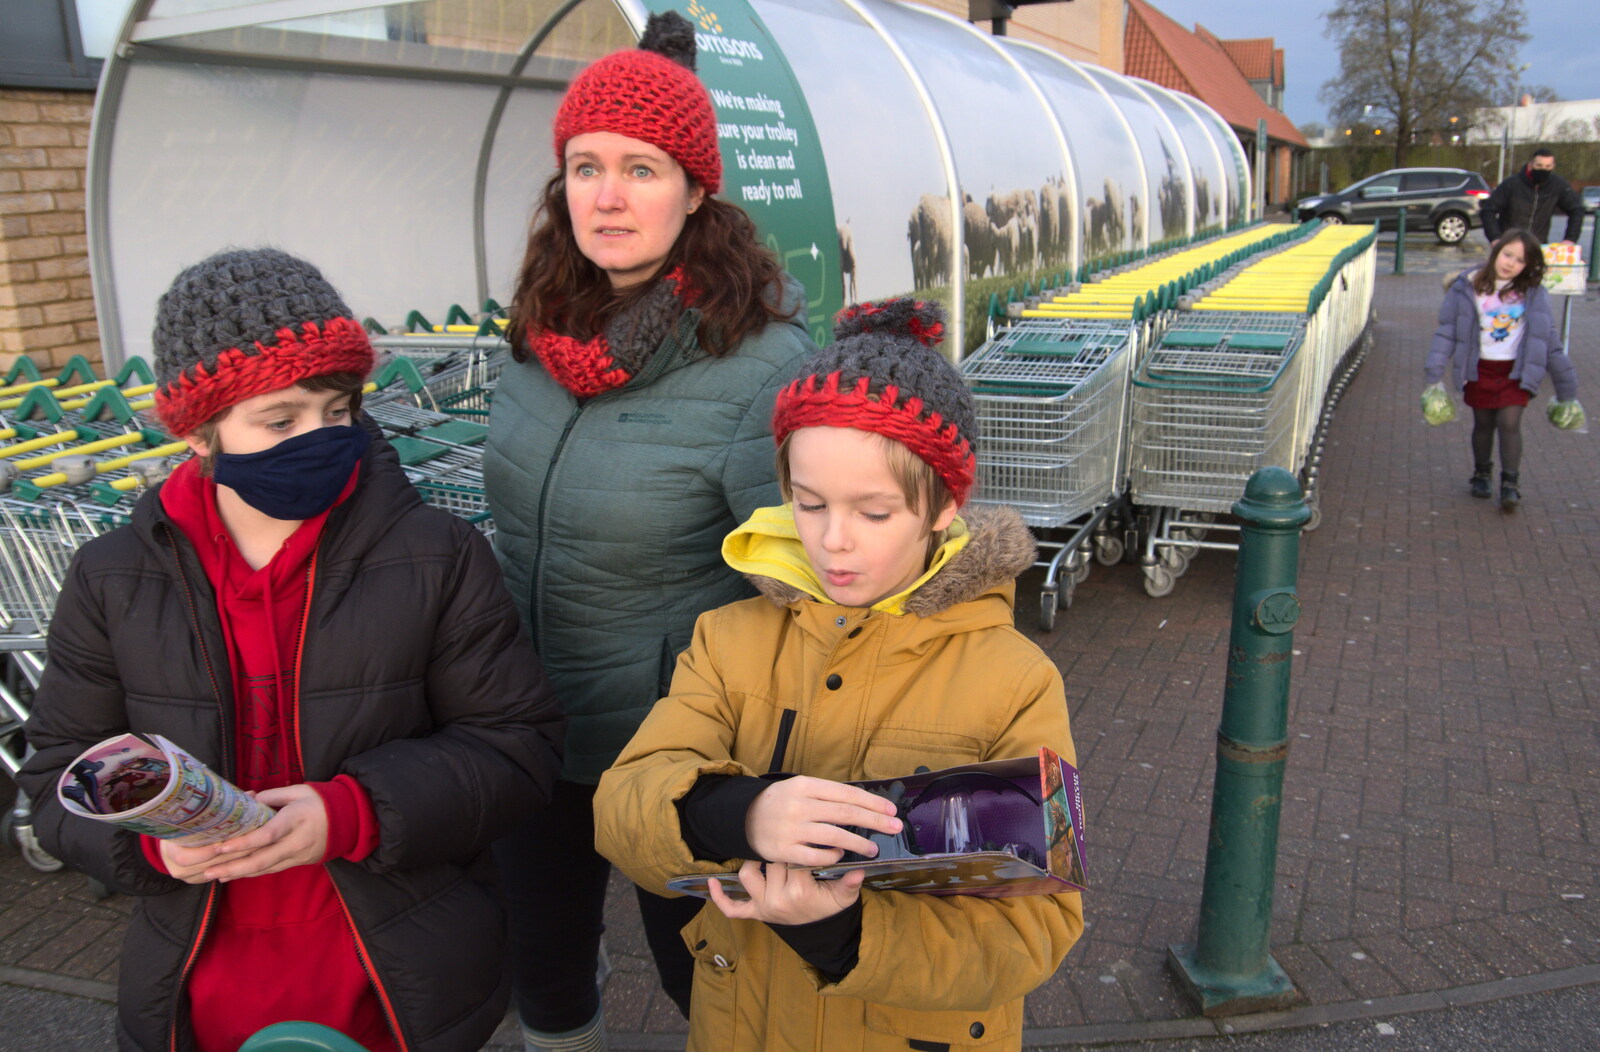 Fred, Isobel and Harry outside Morrisons from A Walk Around Redgrave and Lopham Fen, Redgrave, Suffolk - 3rd January 2021